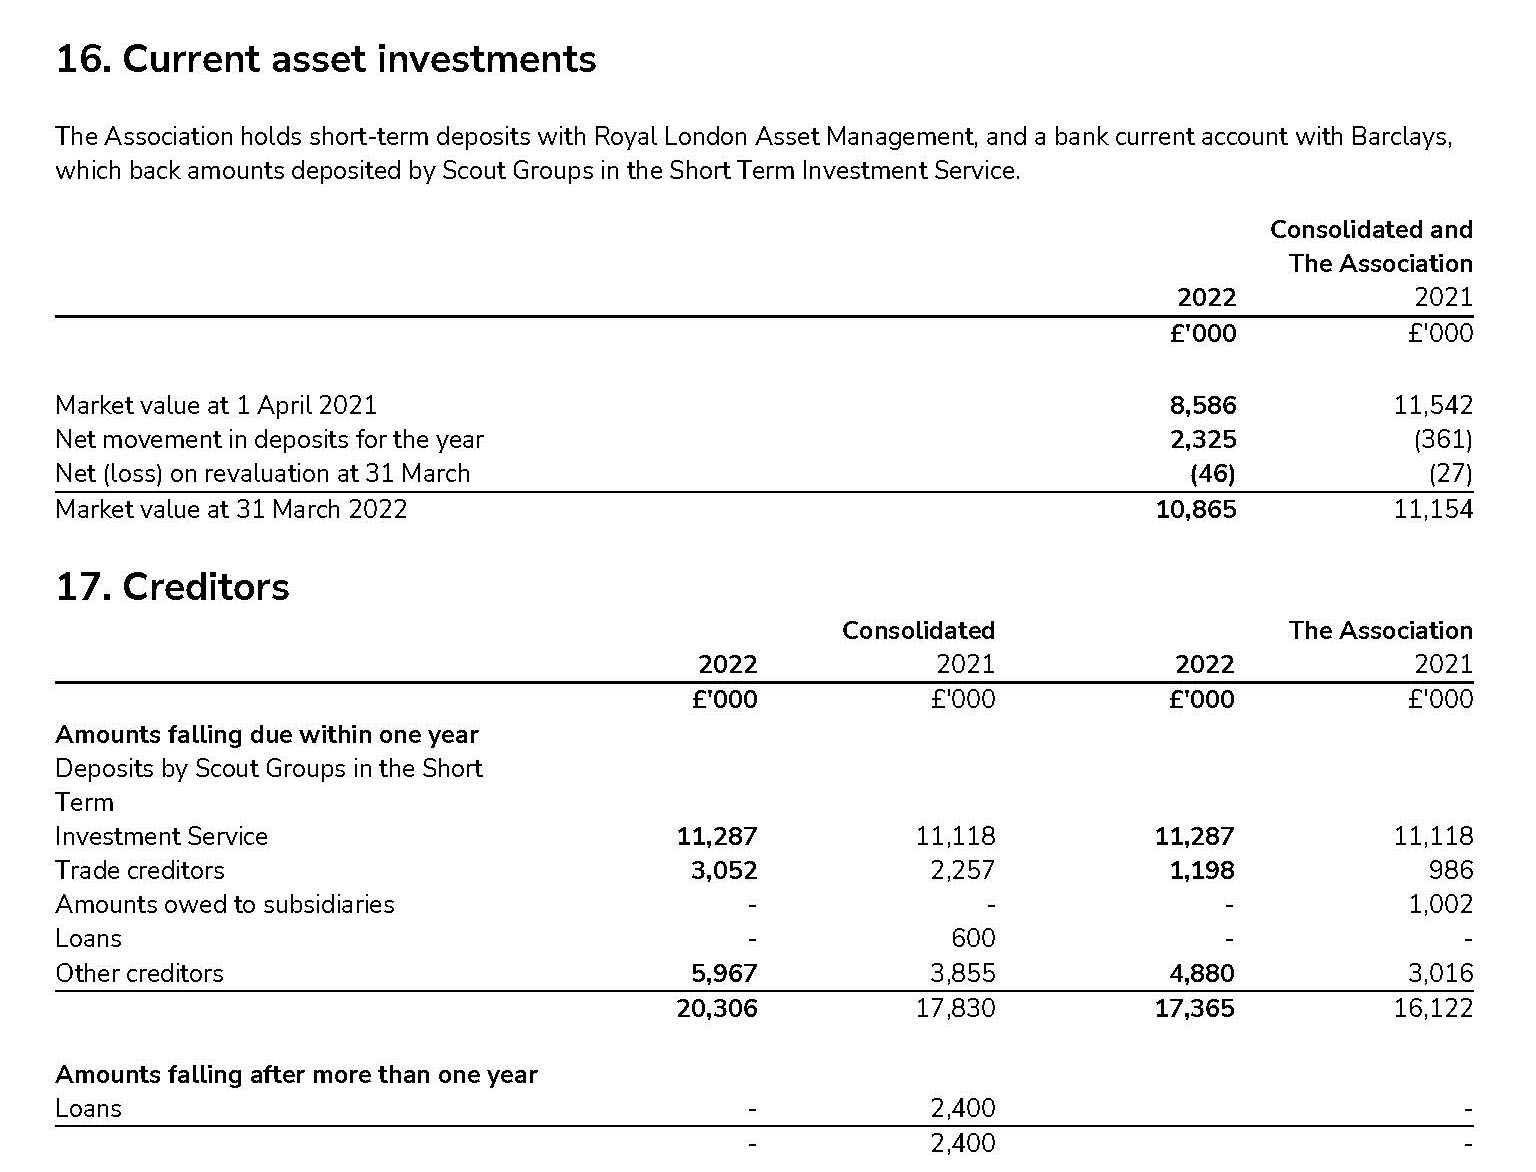 Tables showing Scouts current asset investments and creditors in 2021-22